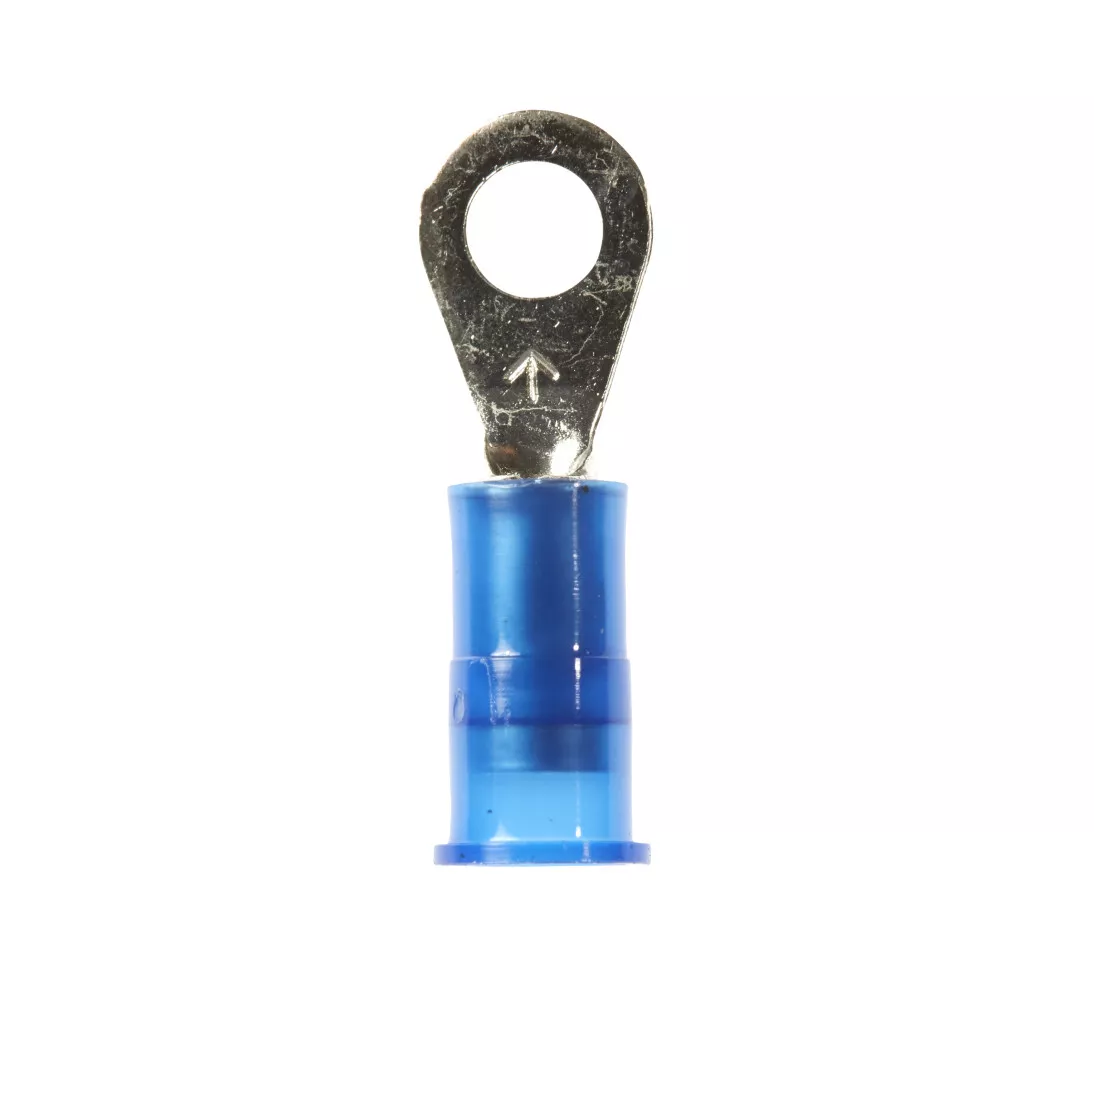 3M™ Scotchlok™ Ring Tongue, Nylon Insulated w/Insulation Grip
MNG14-8R/LK, Stud Size 8, 1000/Case